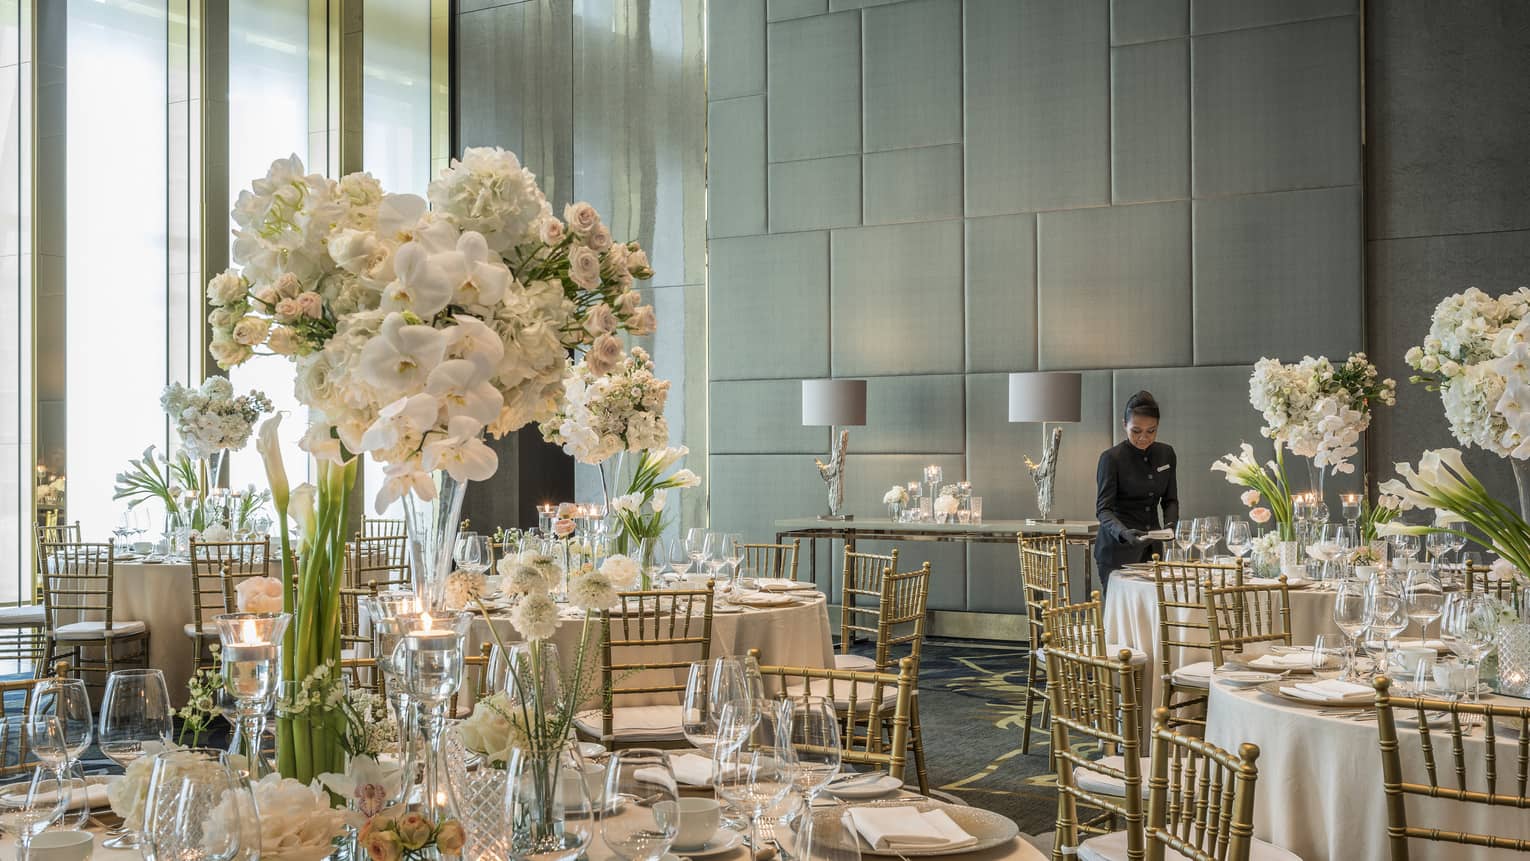 Hotel staff sets table in Western Banquet room with round tables, white flowers 